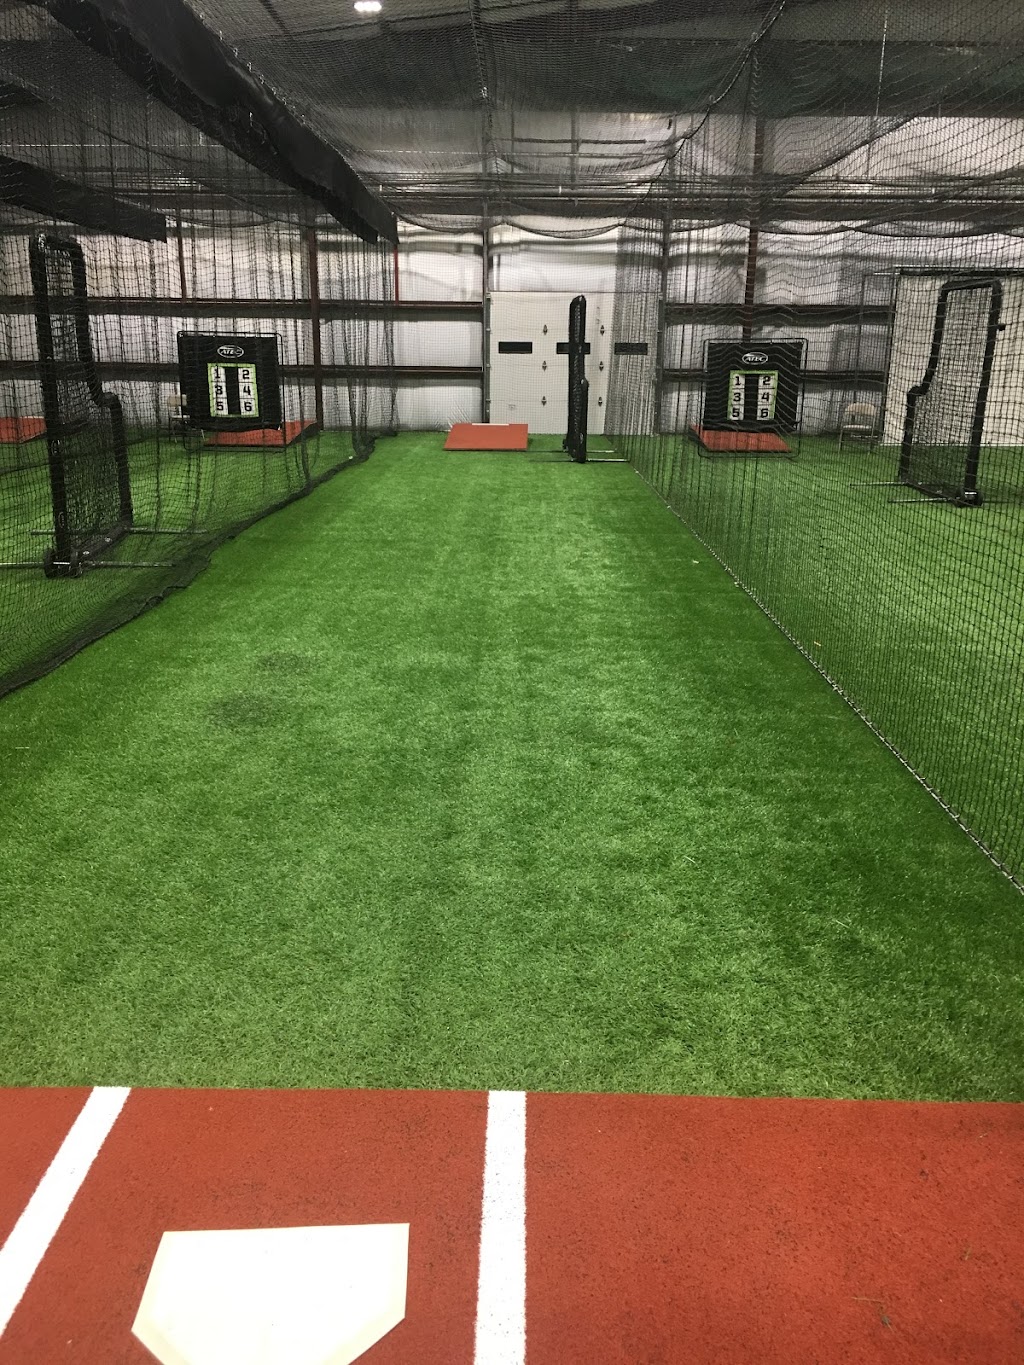 In Bounds Sports Training Facility | 760 fm 1138, Nevada, TX 75173 | Phone: (972) 843-0169